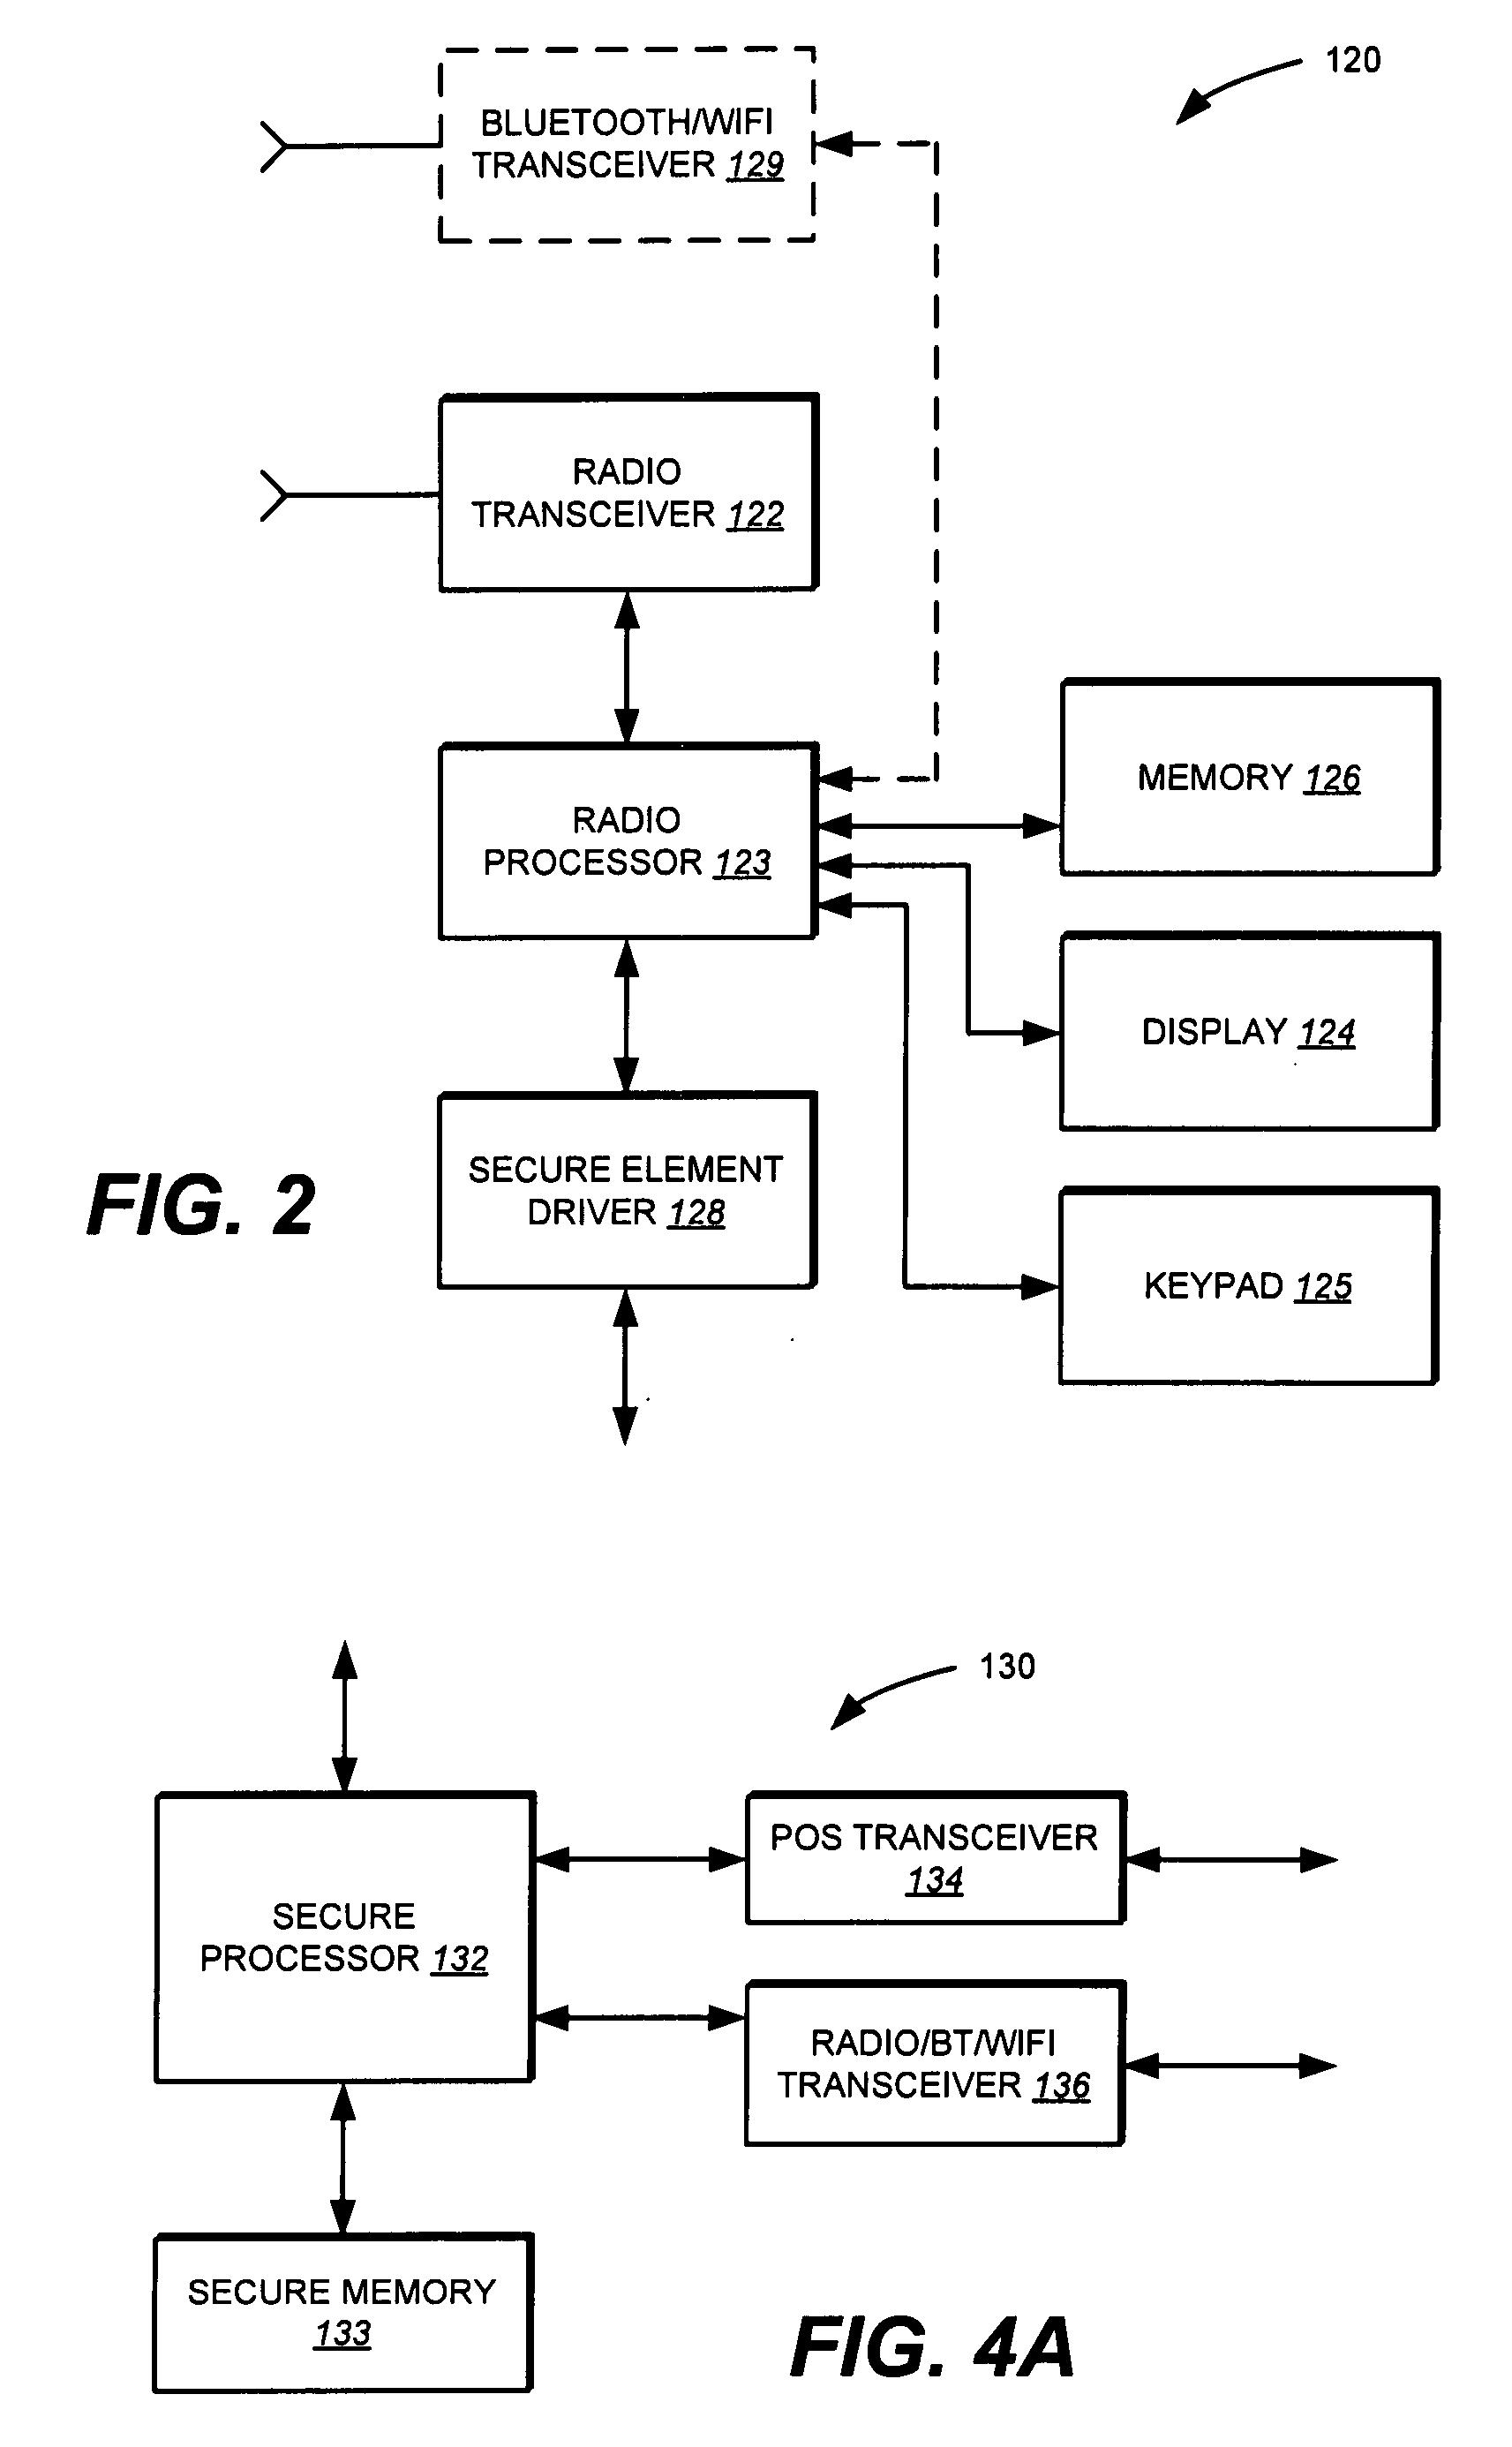 Method and system for purchasing event tickets using a mobile communication device